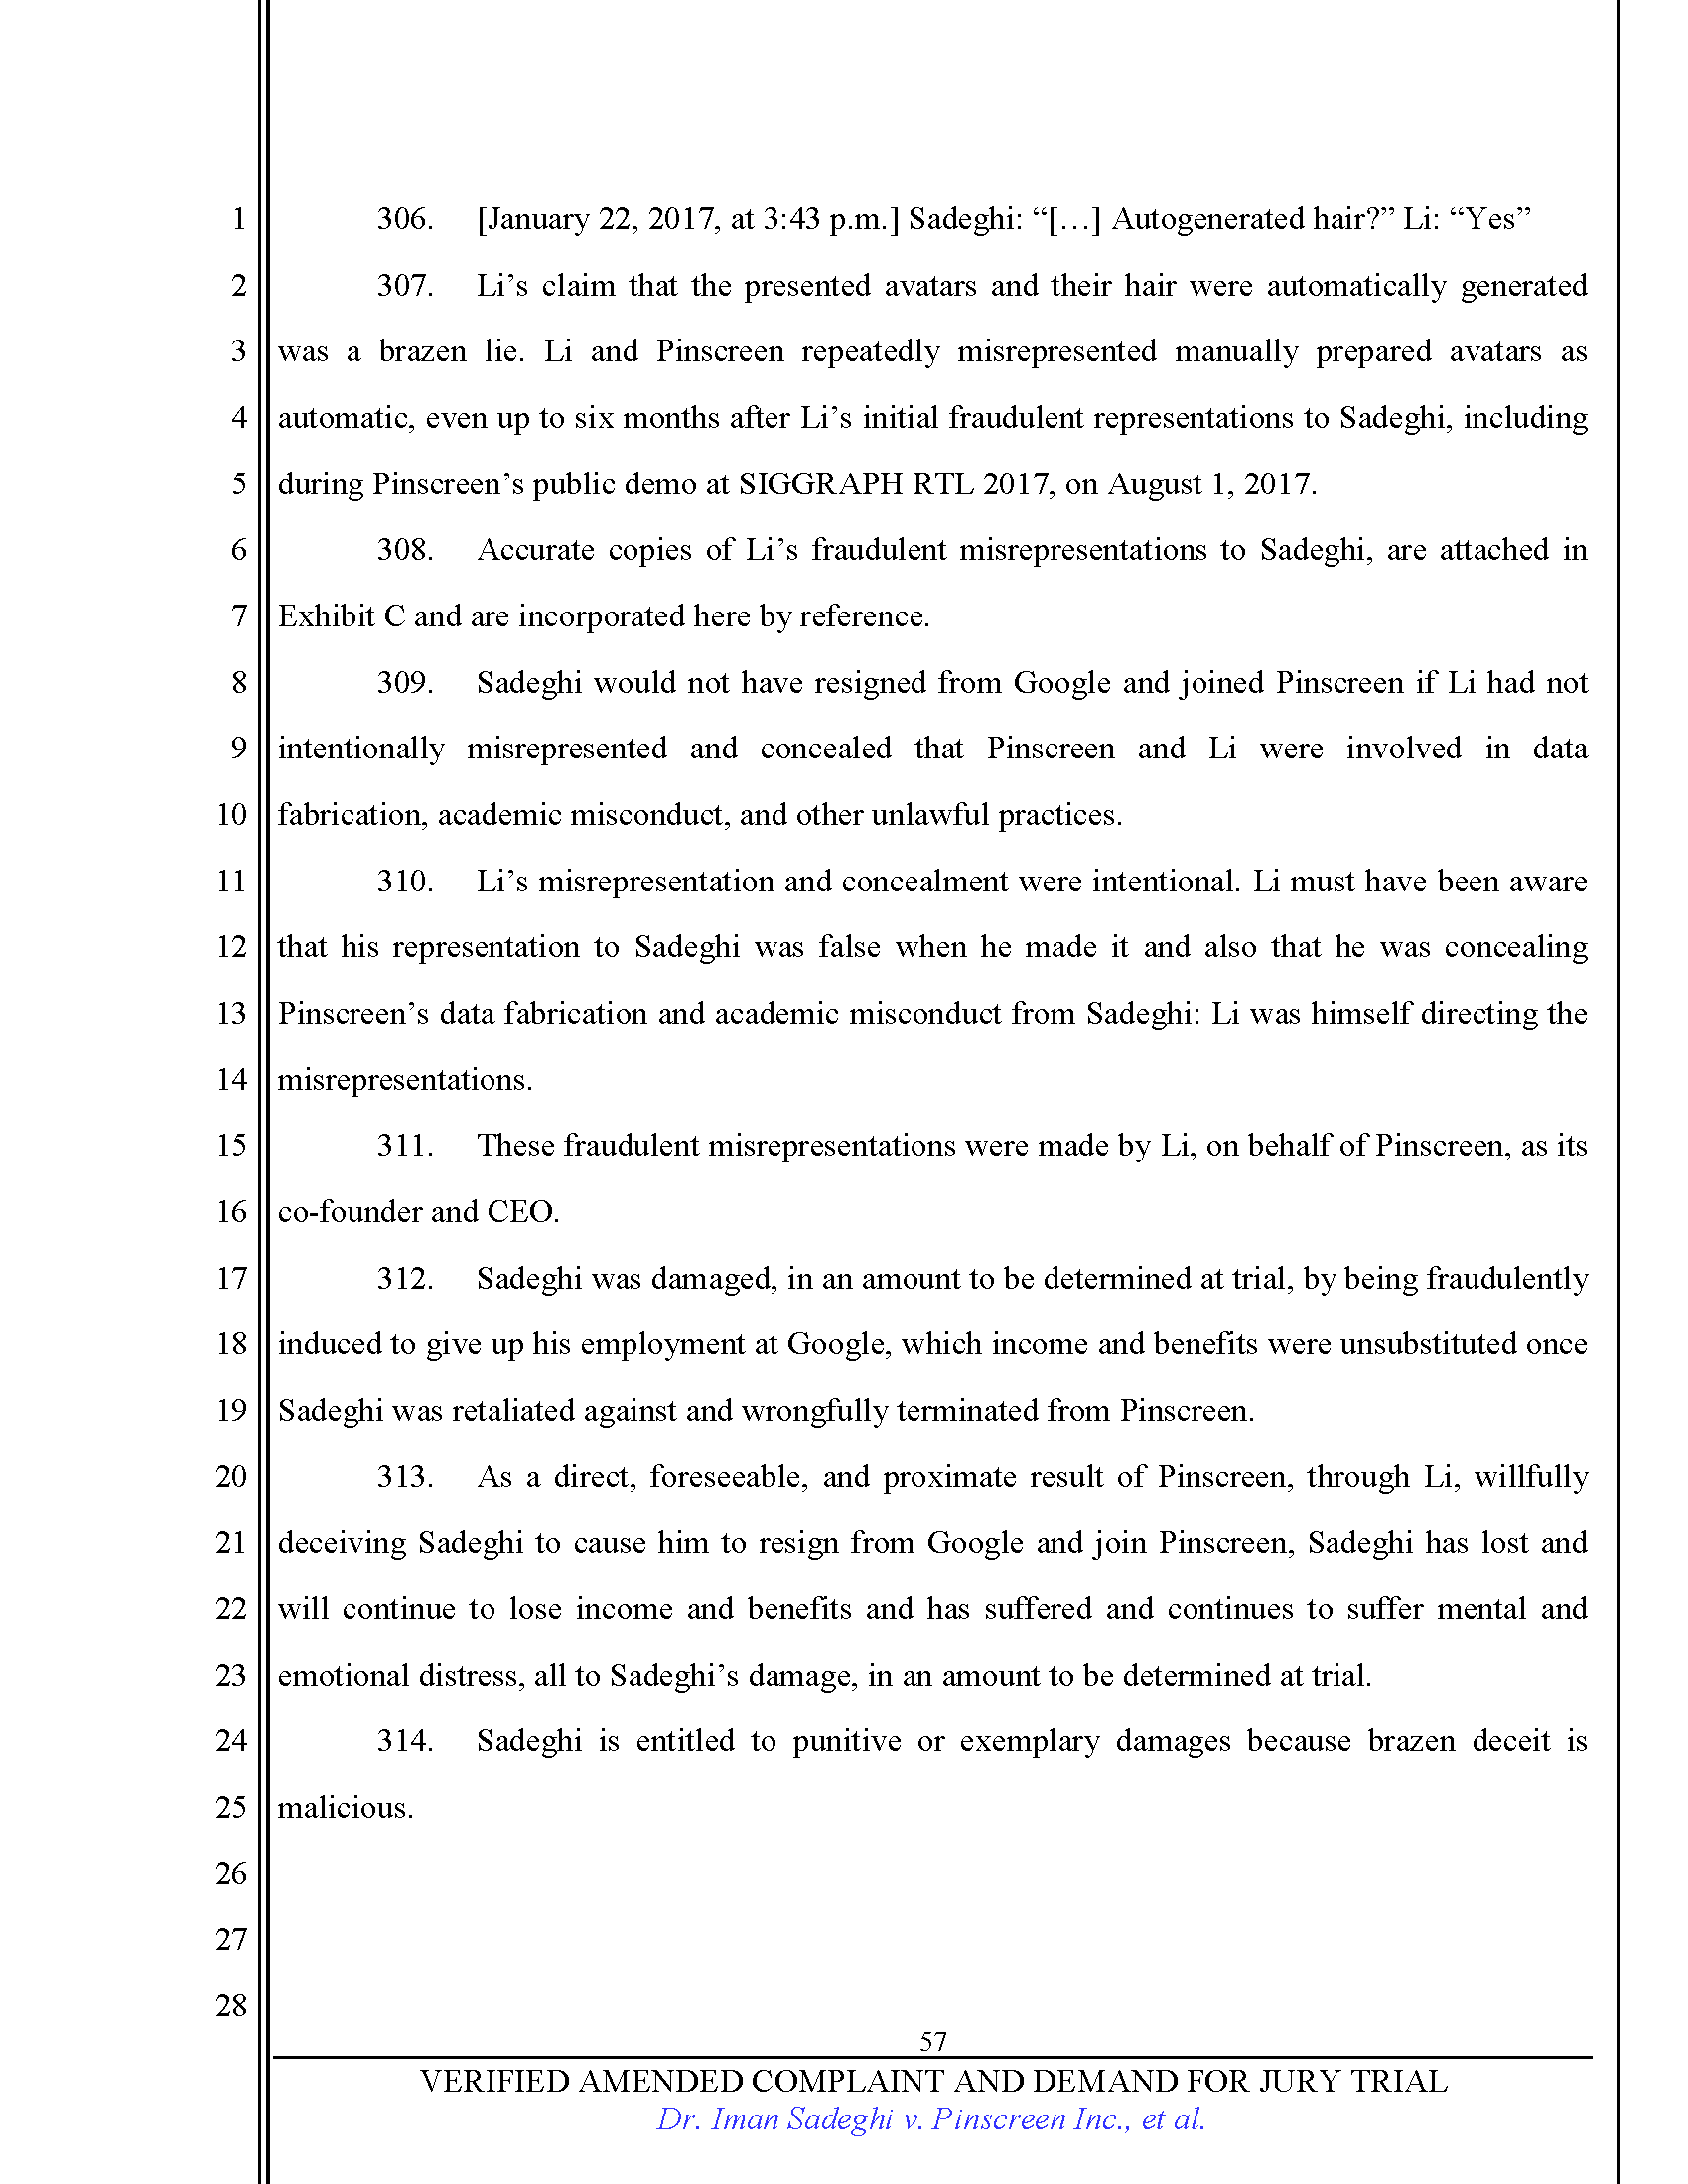 First Amended Complaint (FAC) Page 57